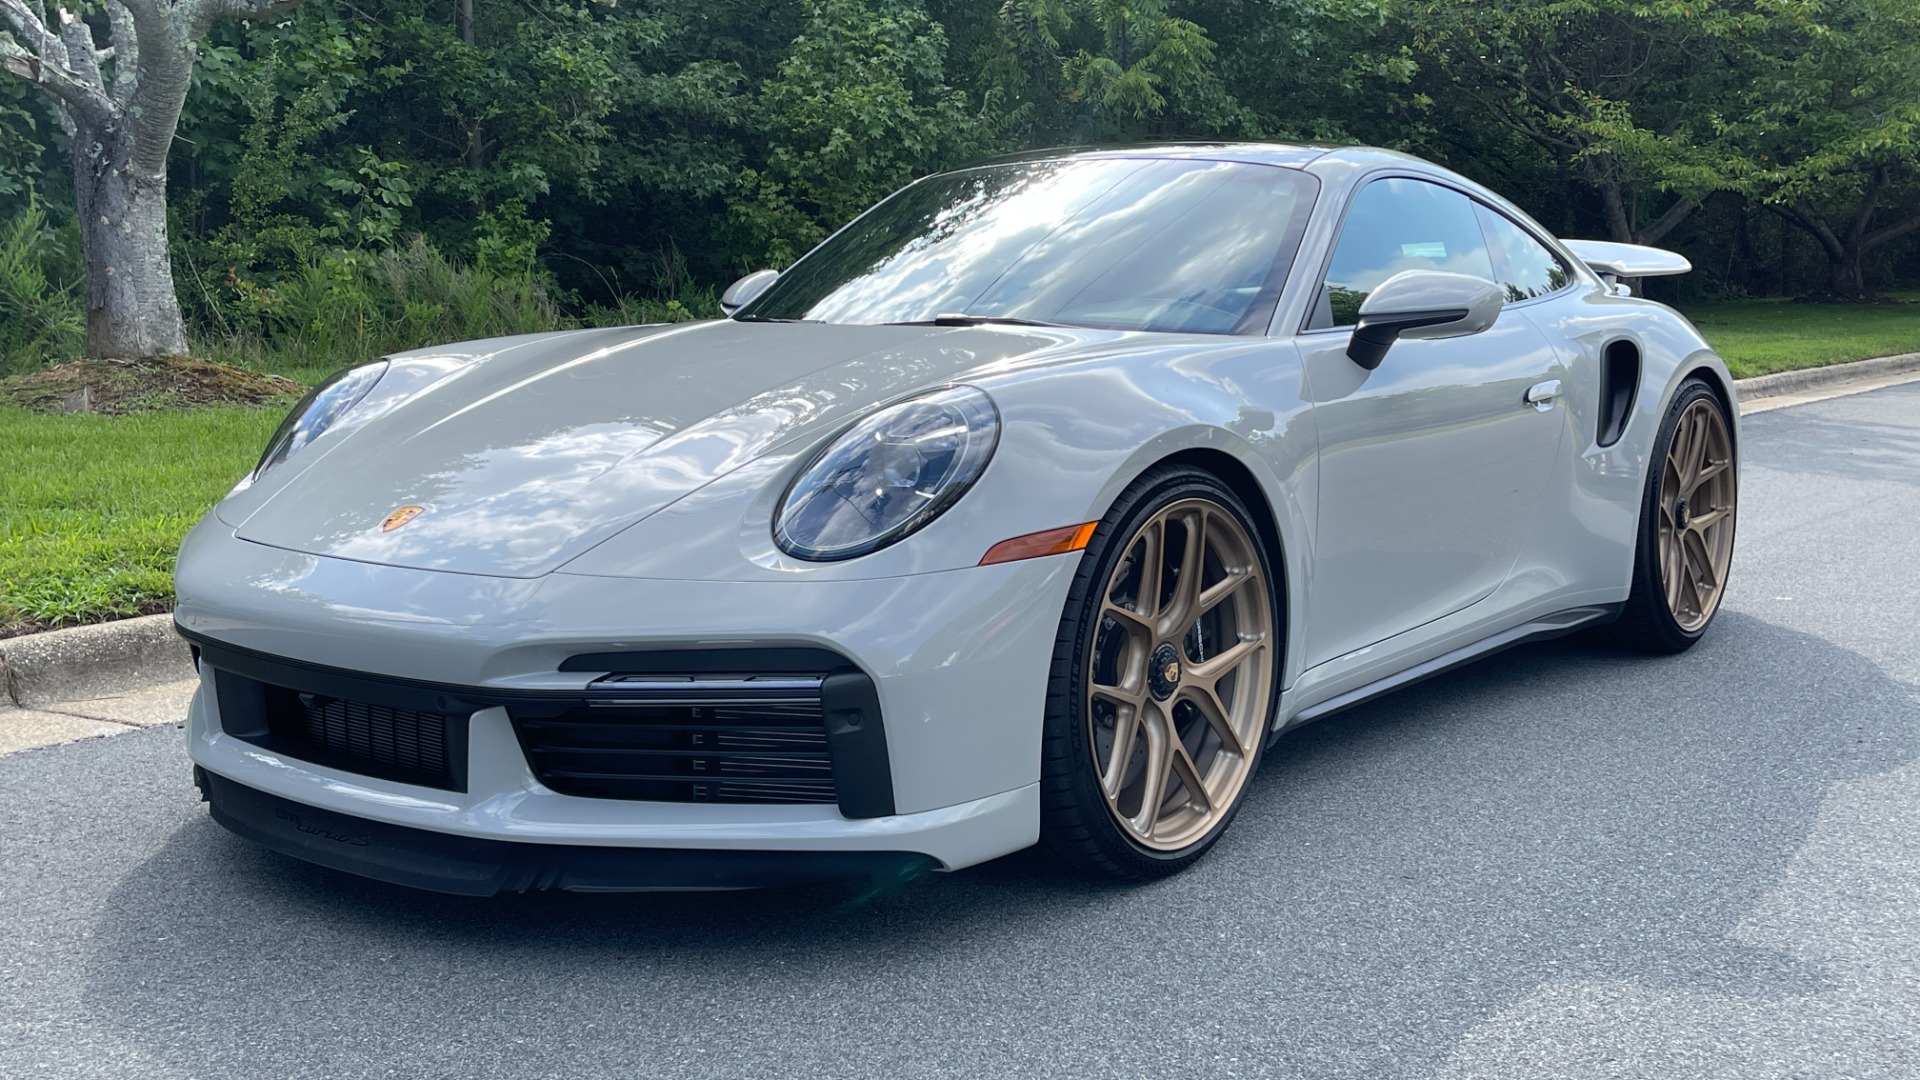 Used 2021 Porsche 911 Turbo S / HRE WHEELS / FRONT LIFT / MATRIX LIGHTS / PASM SUSPENSION for sale $299,000 at Formula Imports in Charlotte NC 28227 3